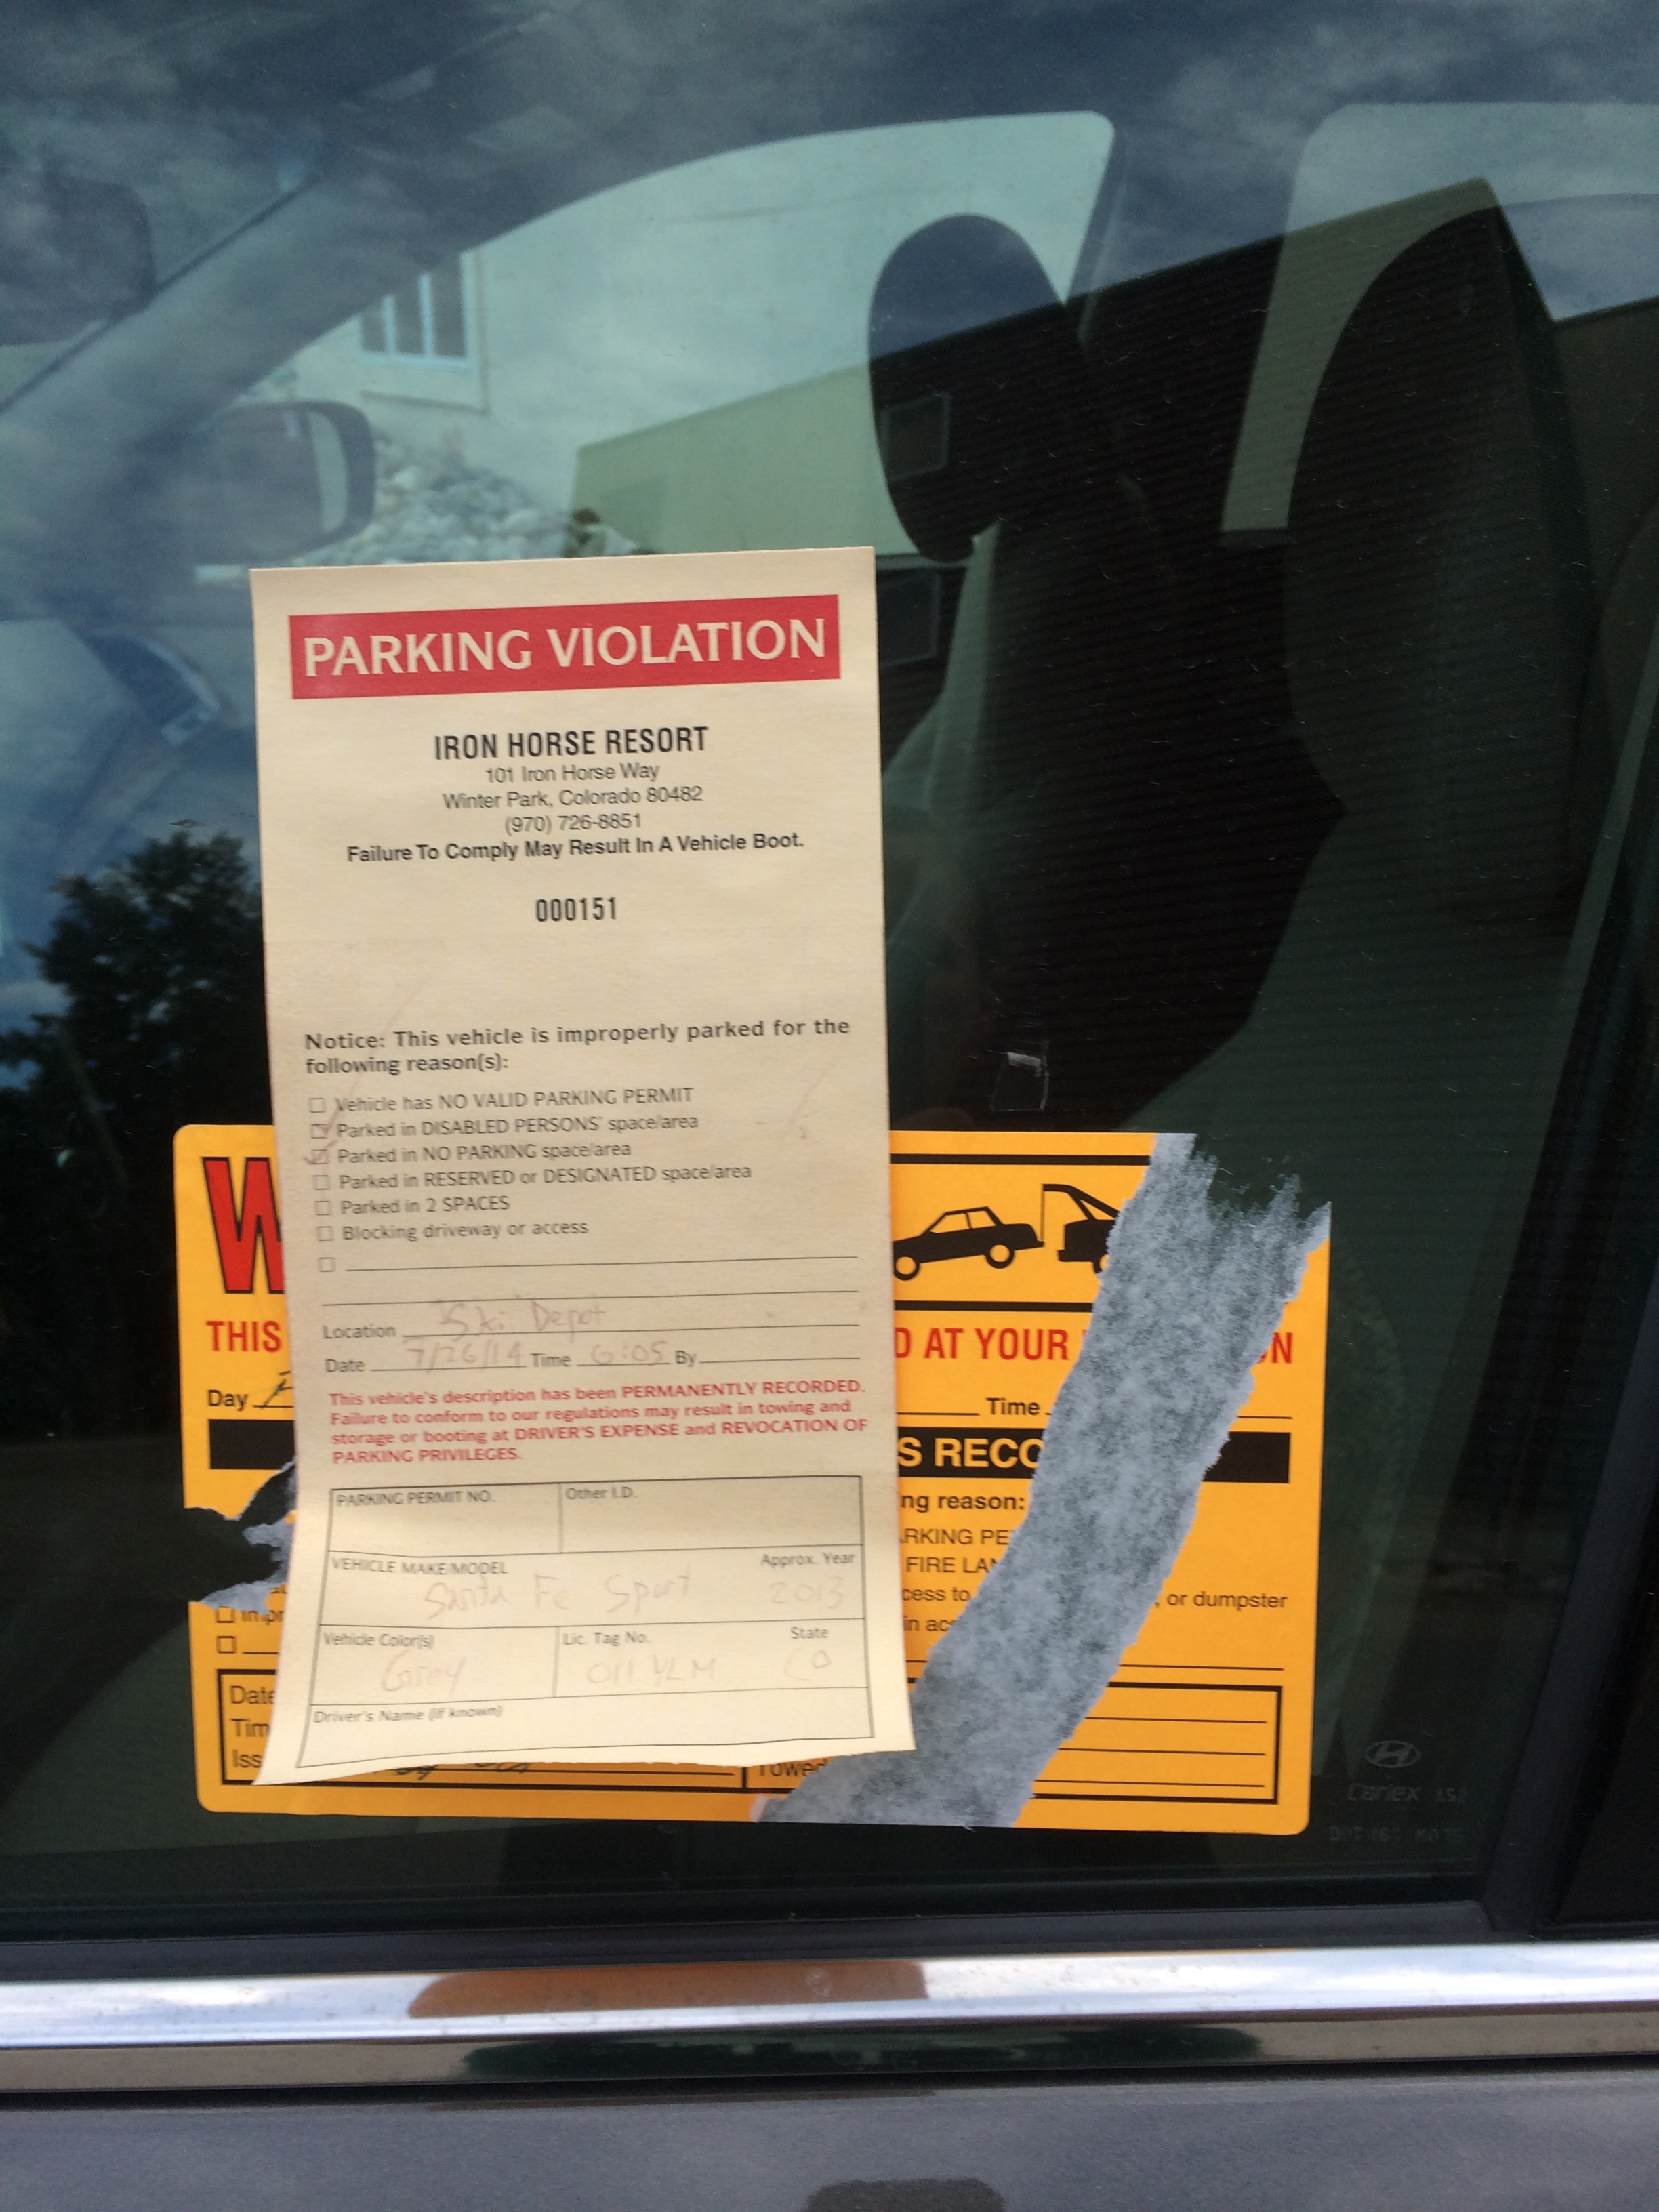 The usual American laws & stuff. Oops. Just remember to wind down the window when you return the rental.